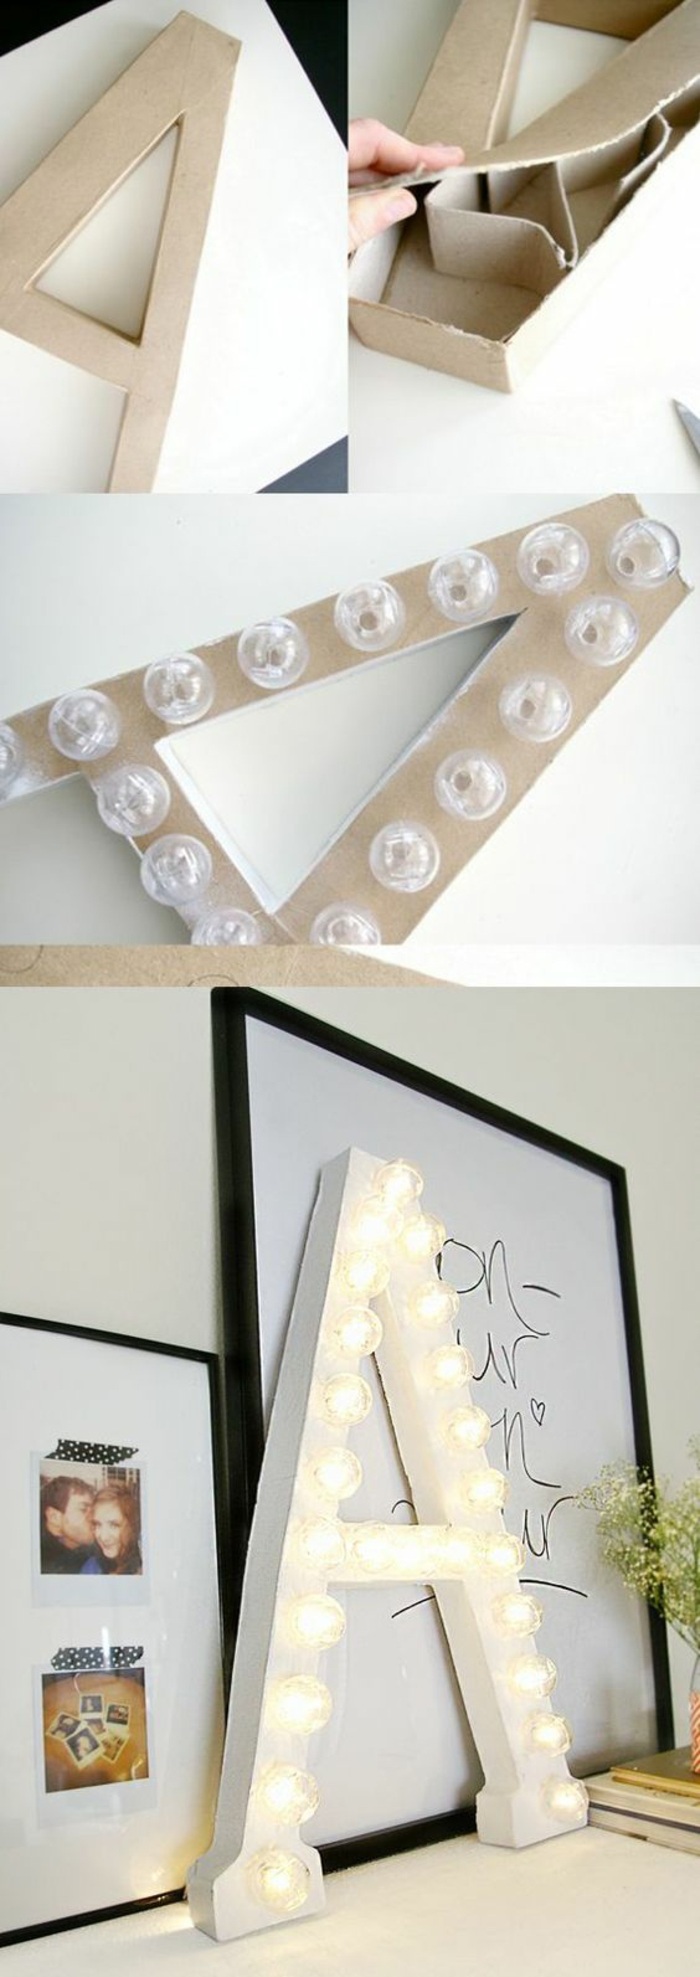 a letter, electric bulbs, framed art, creative things to do when bored